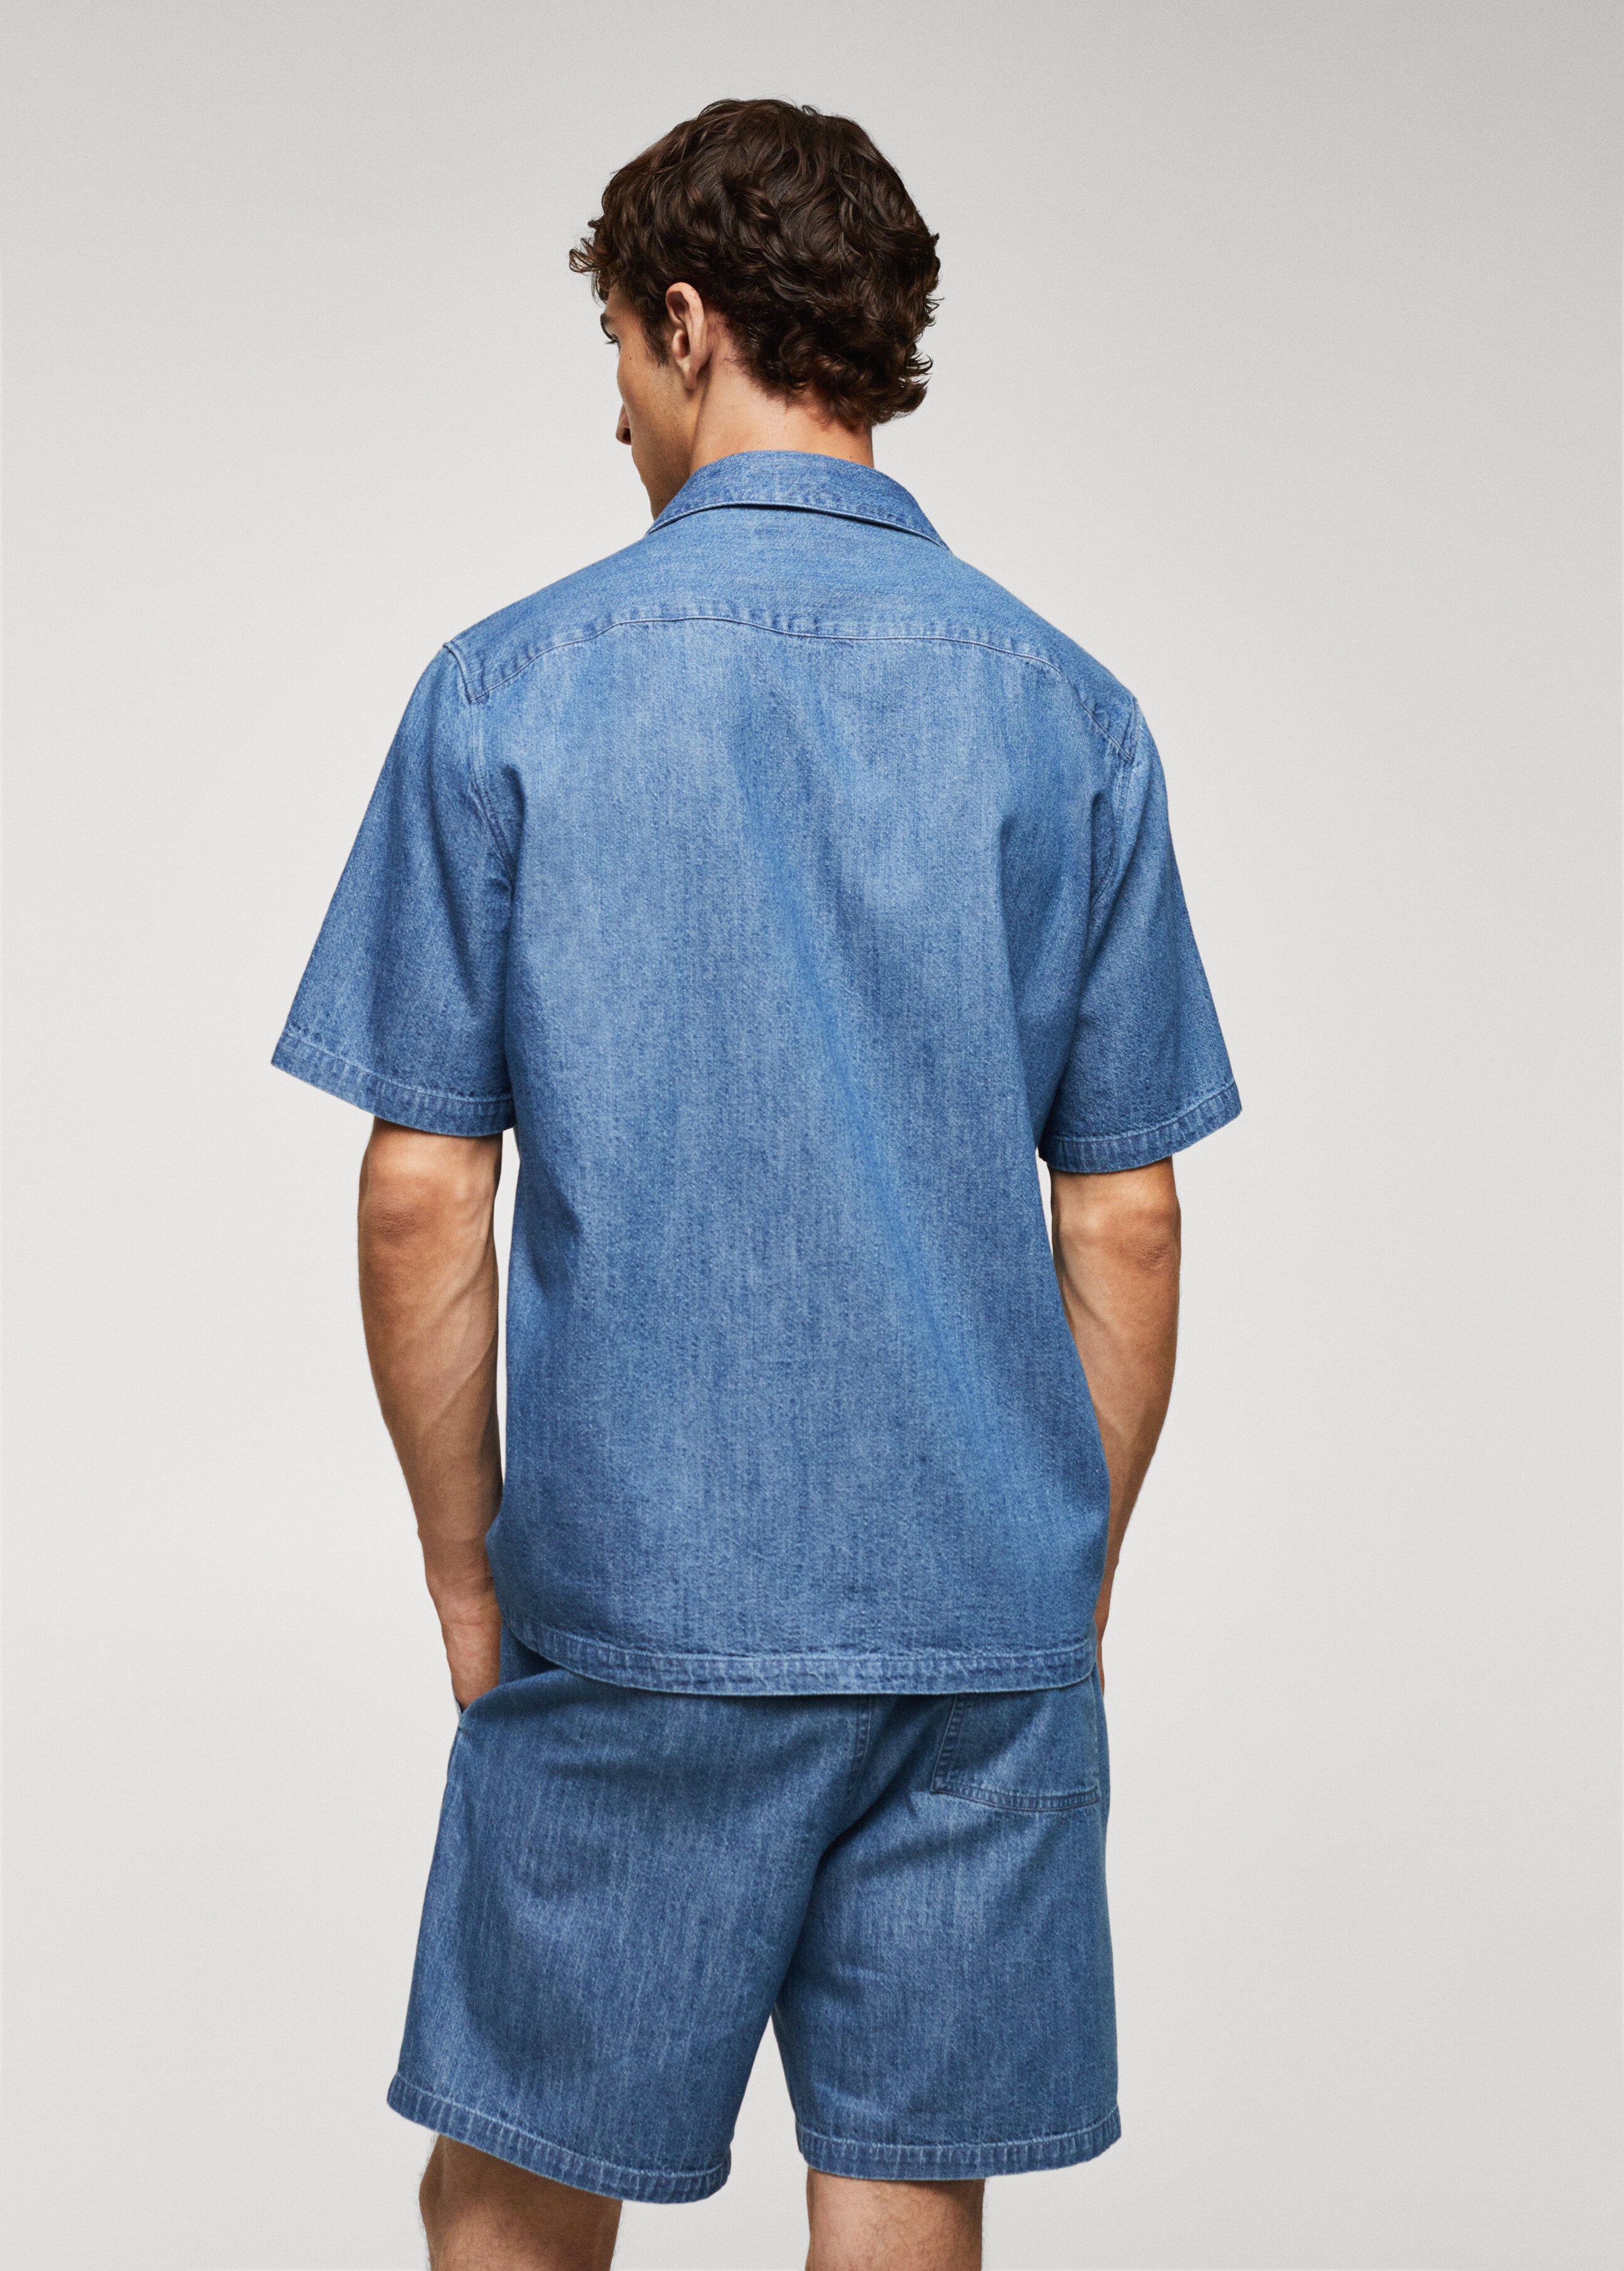 100% cotton chambray shirt - Reverse of the article